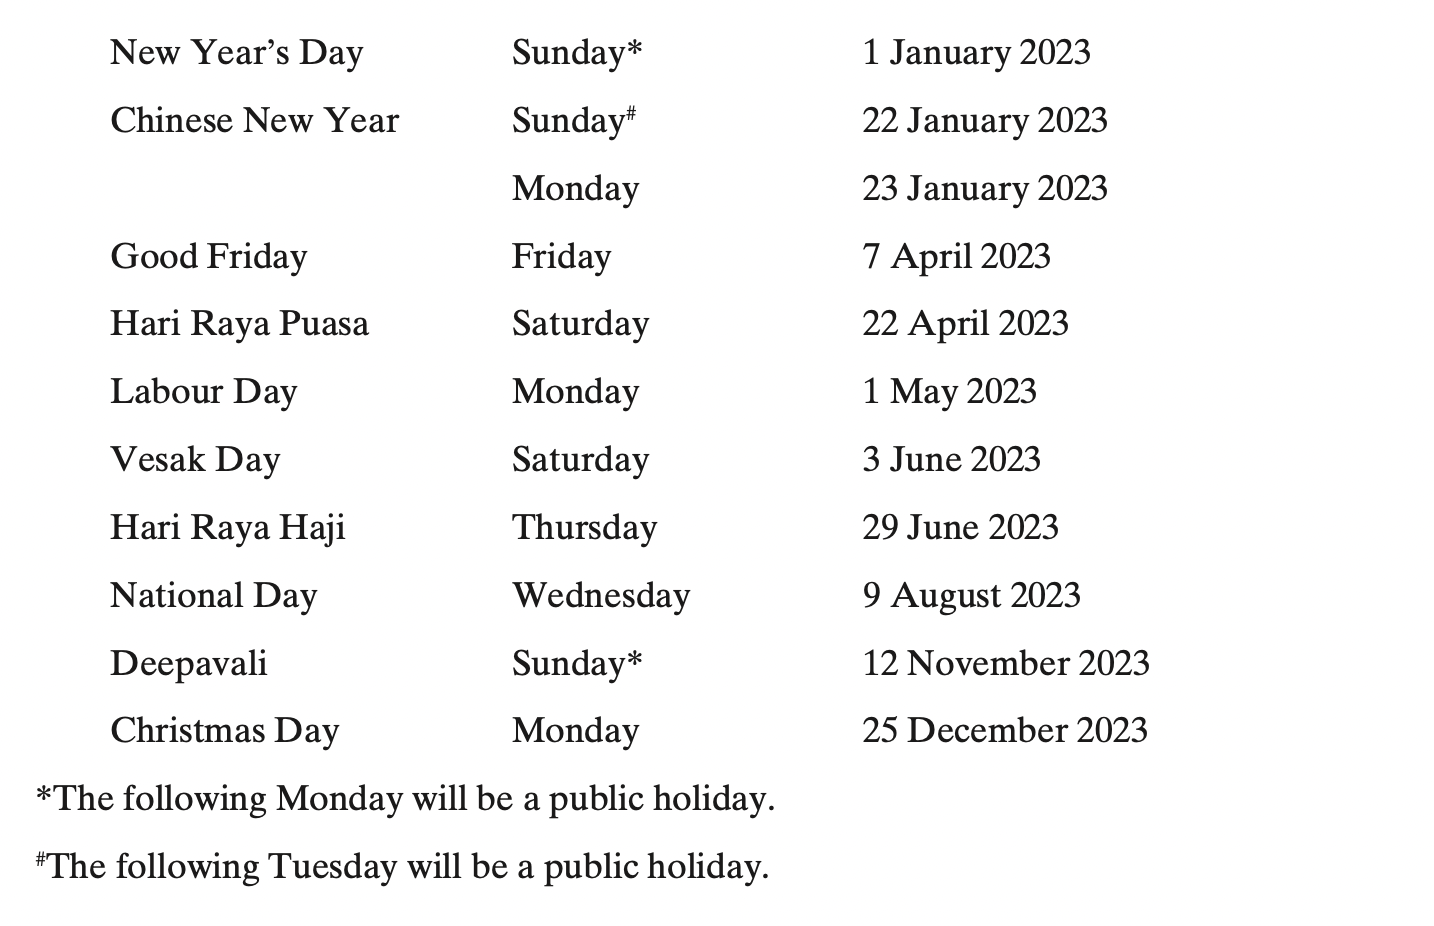 Up to 7 public holiday long weekends in S'pore in 2023 - Mothership.SG